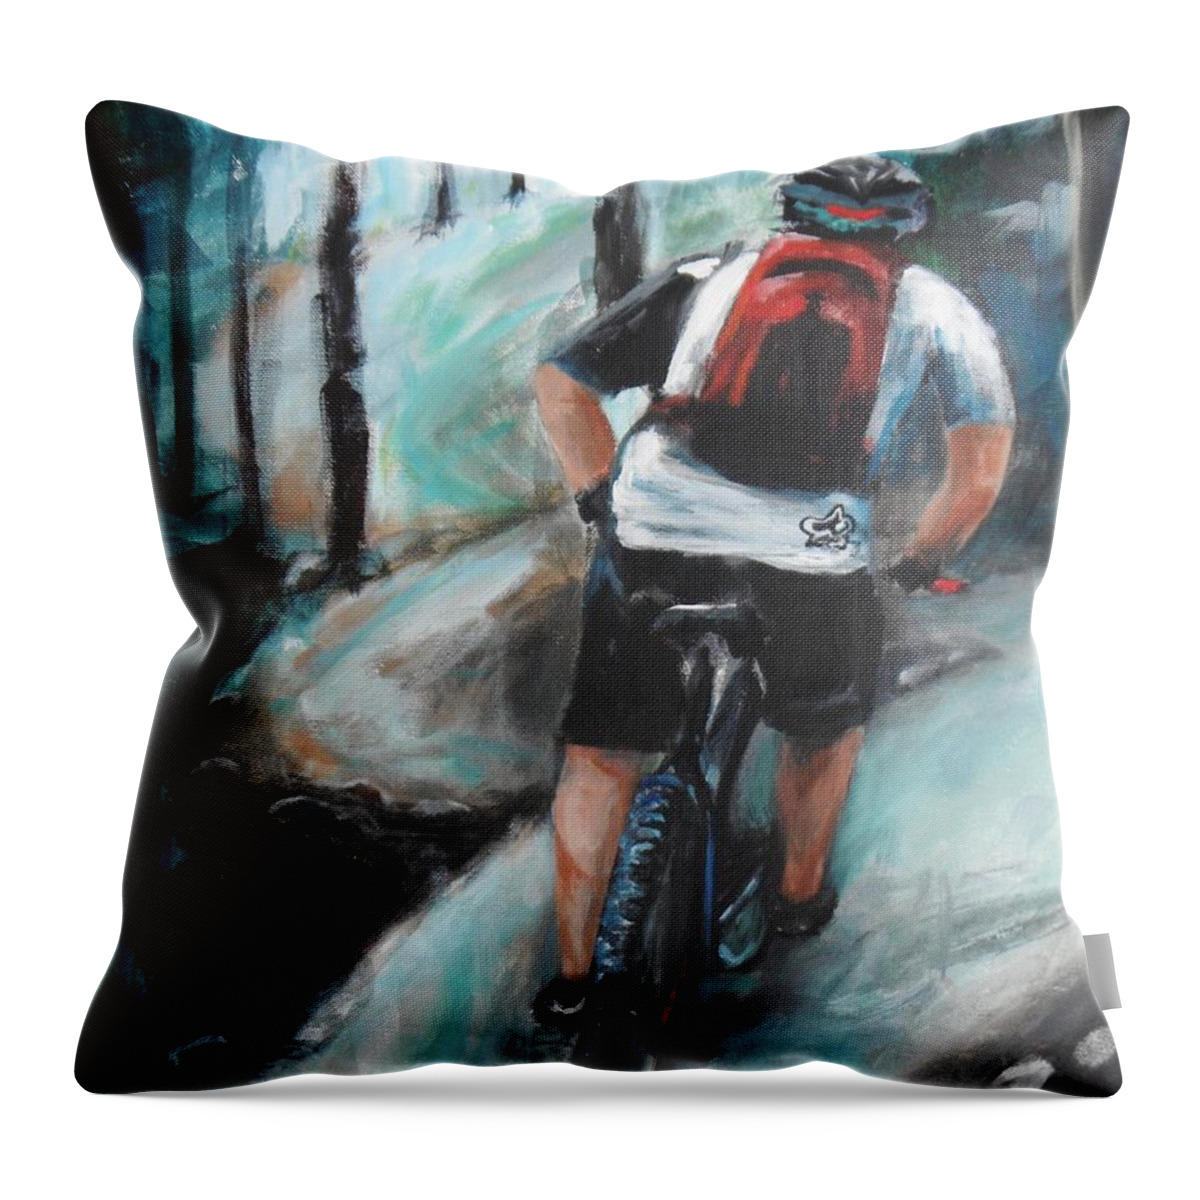 Bicycle Throw Pillow featuring the painting Dodging Trees by Donna Tuten